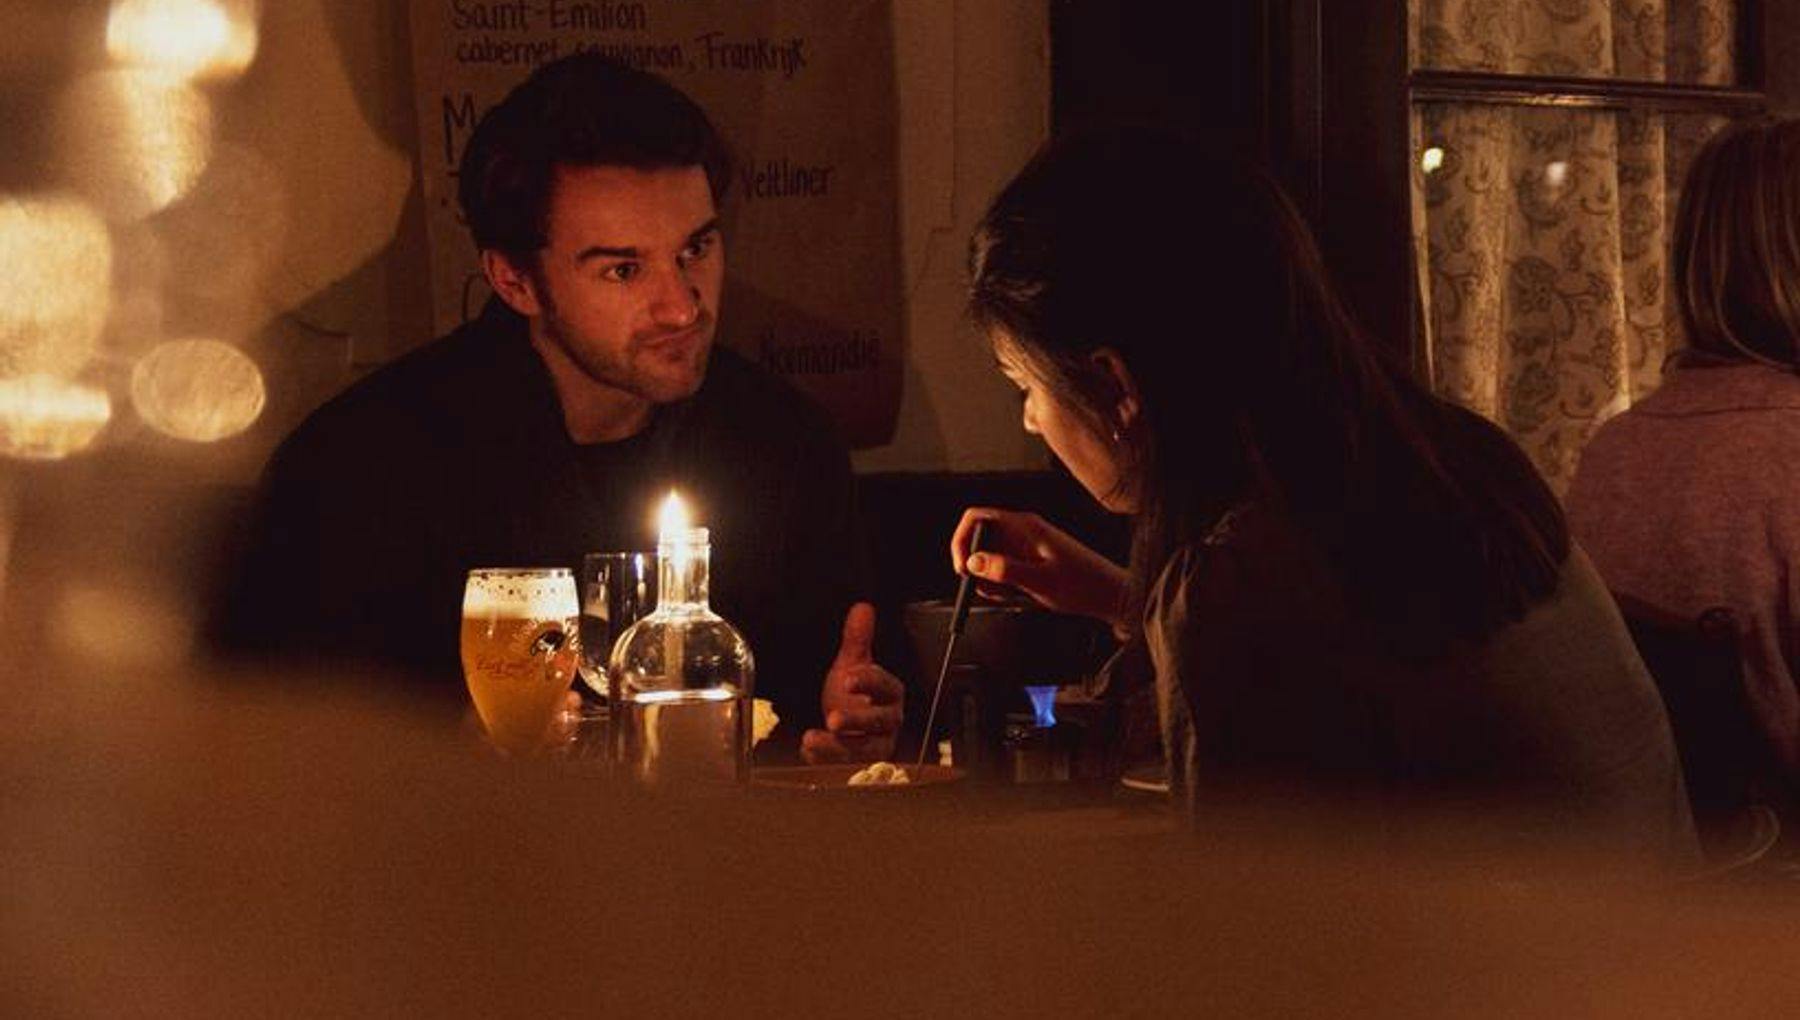 Couple dining in romantic candlelight at Smelt cheese fondue restaurant